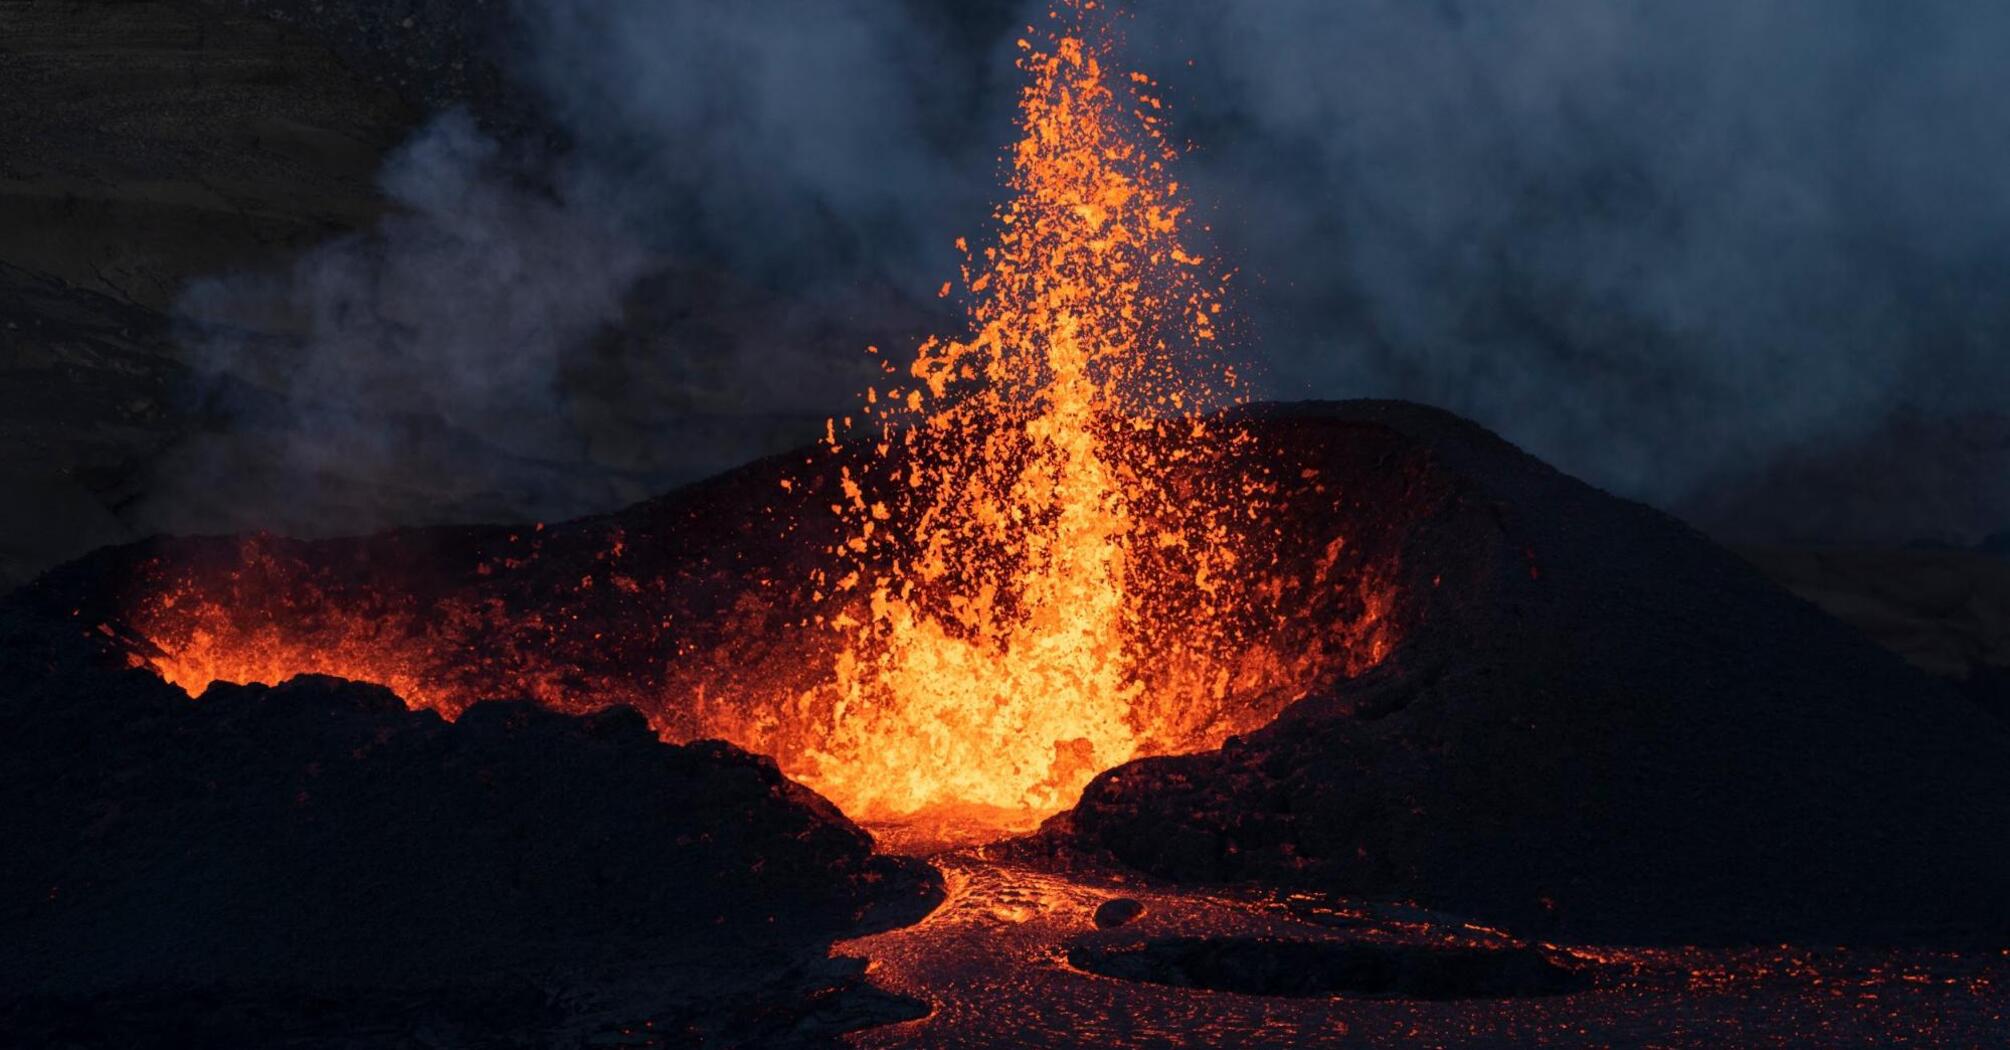 A powerful stream of lava bursts from the crater, sending a column of molten fragments into the sky